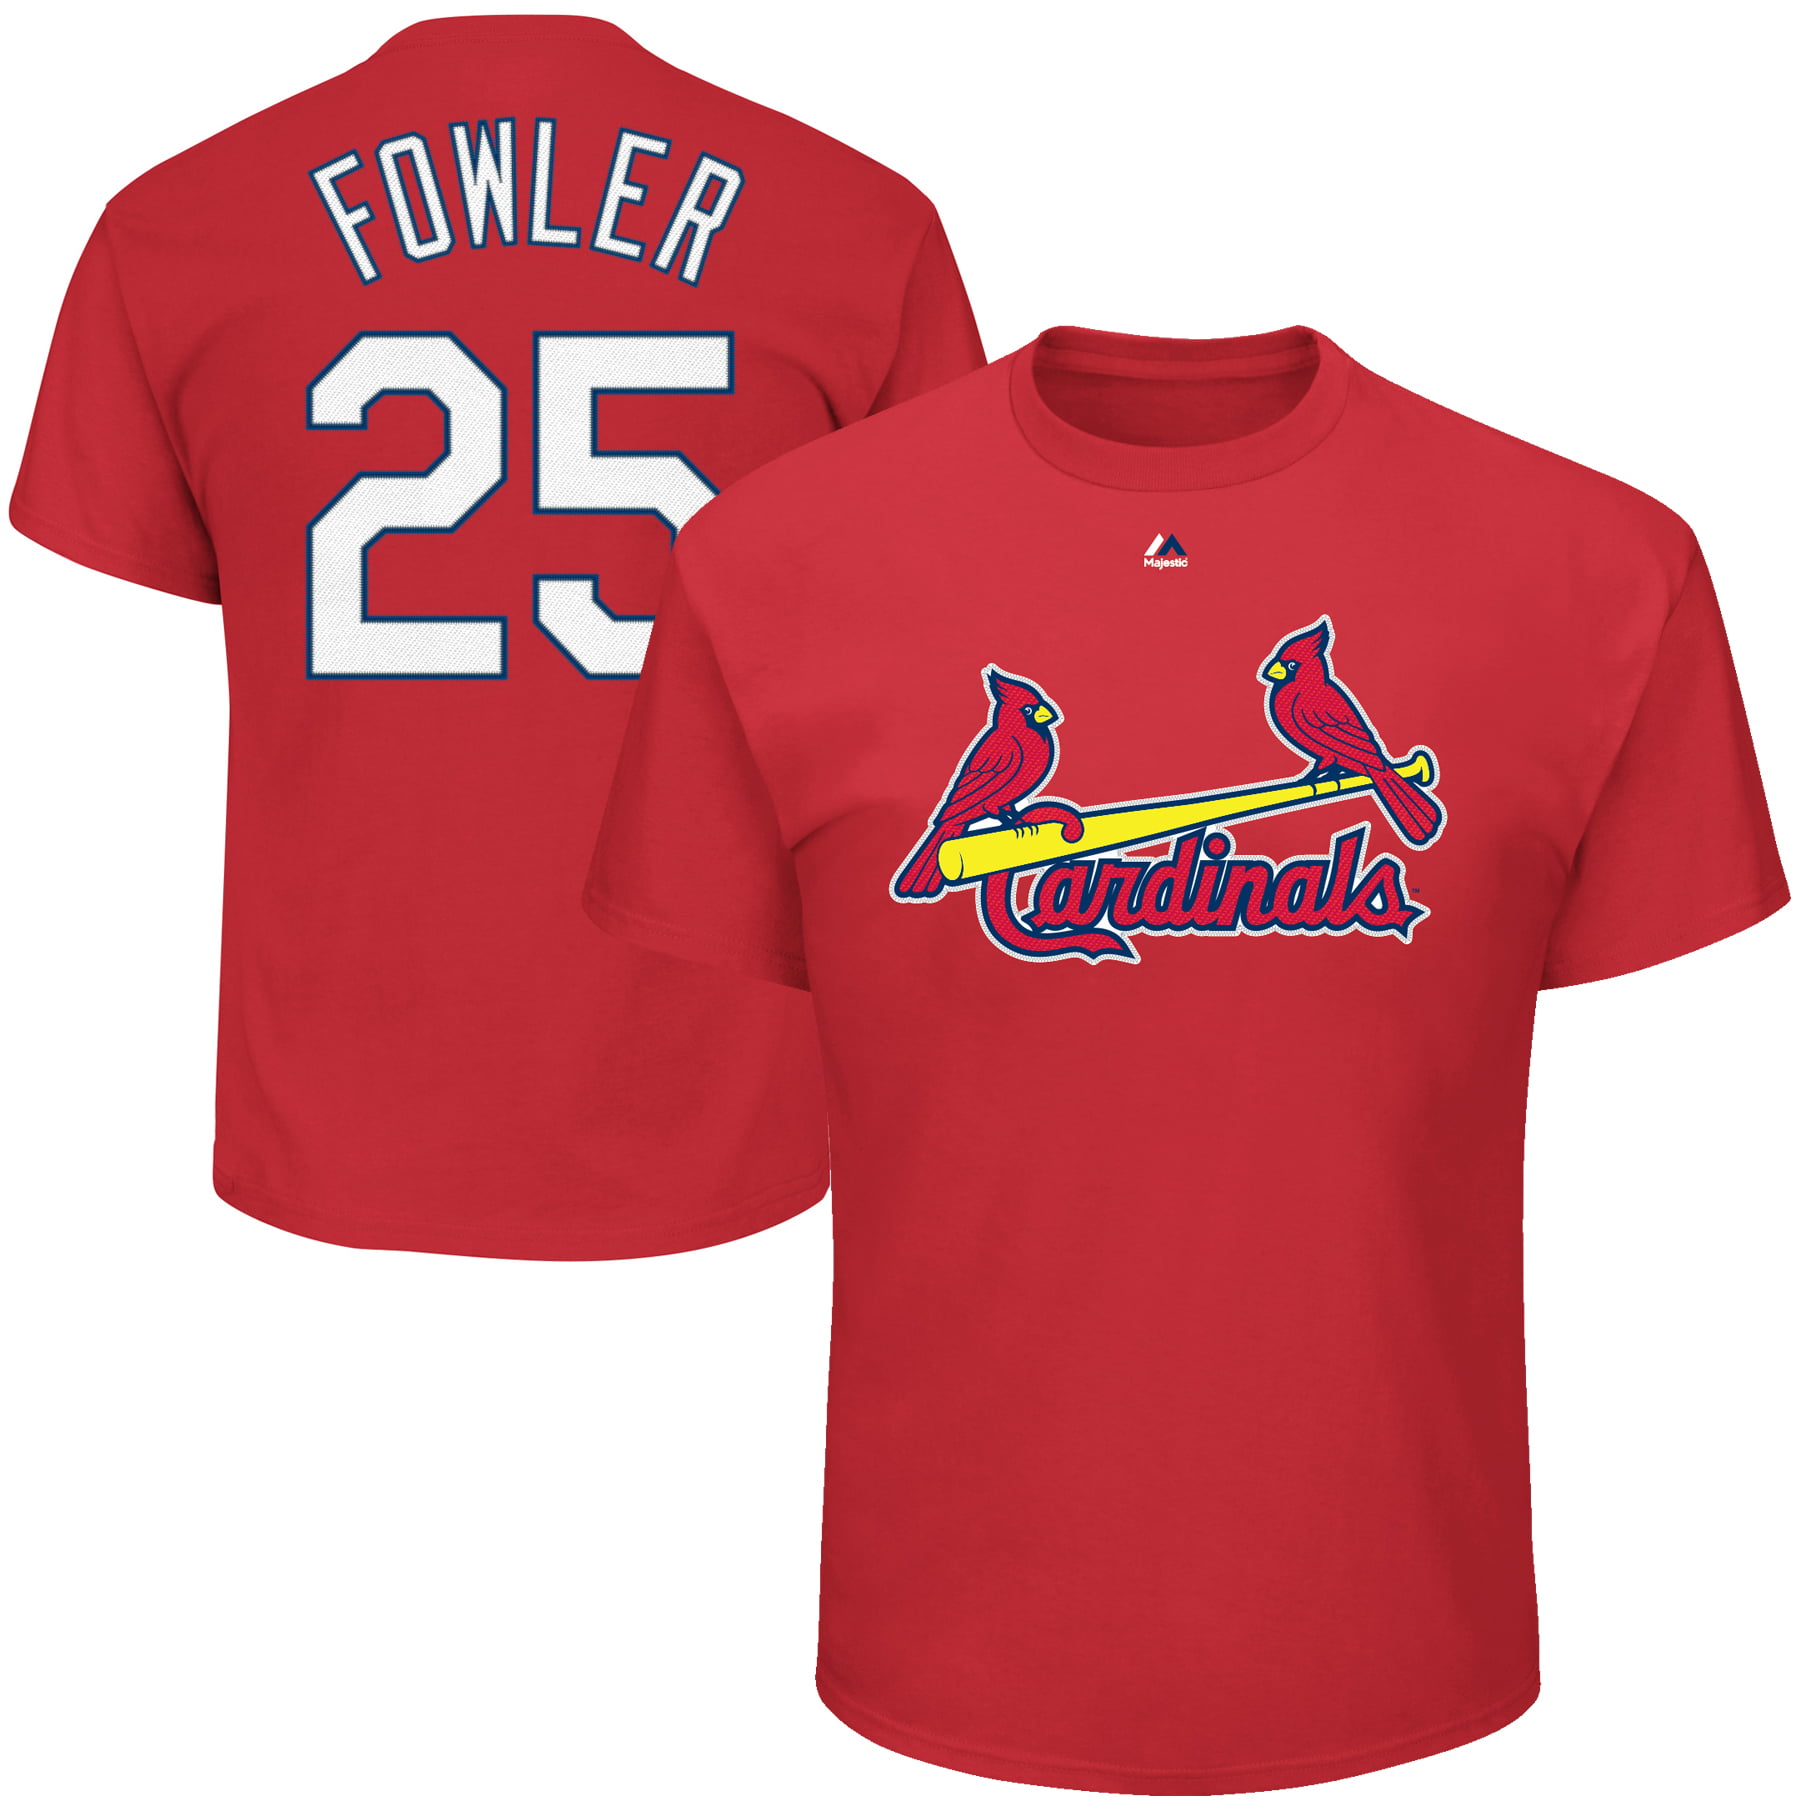 Dexter Fowler St. Louis Cardinals Majestic Name & Number T-Shirt - Red - www.cinemas93.org